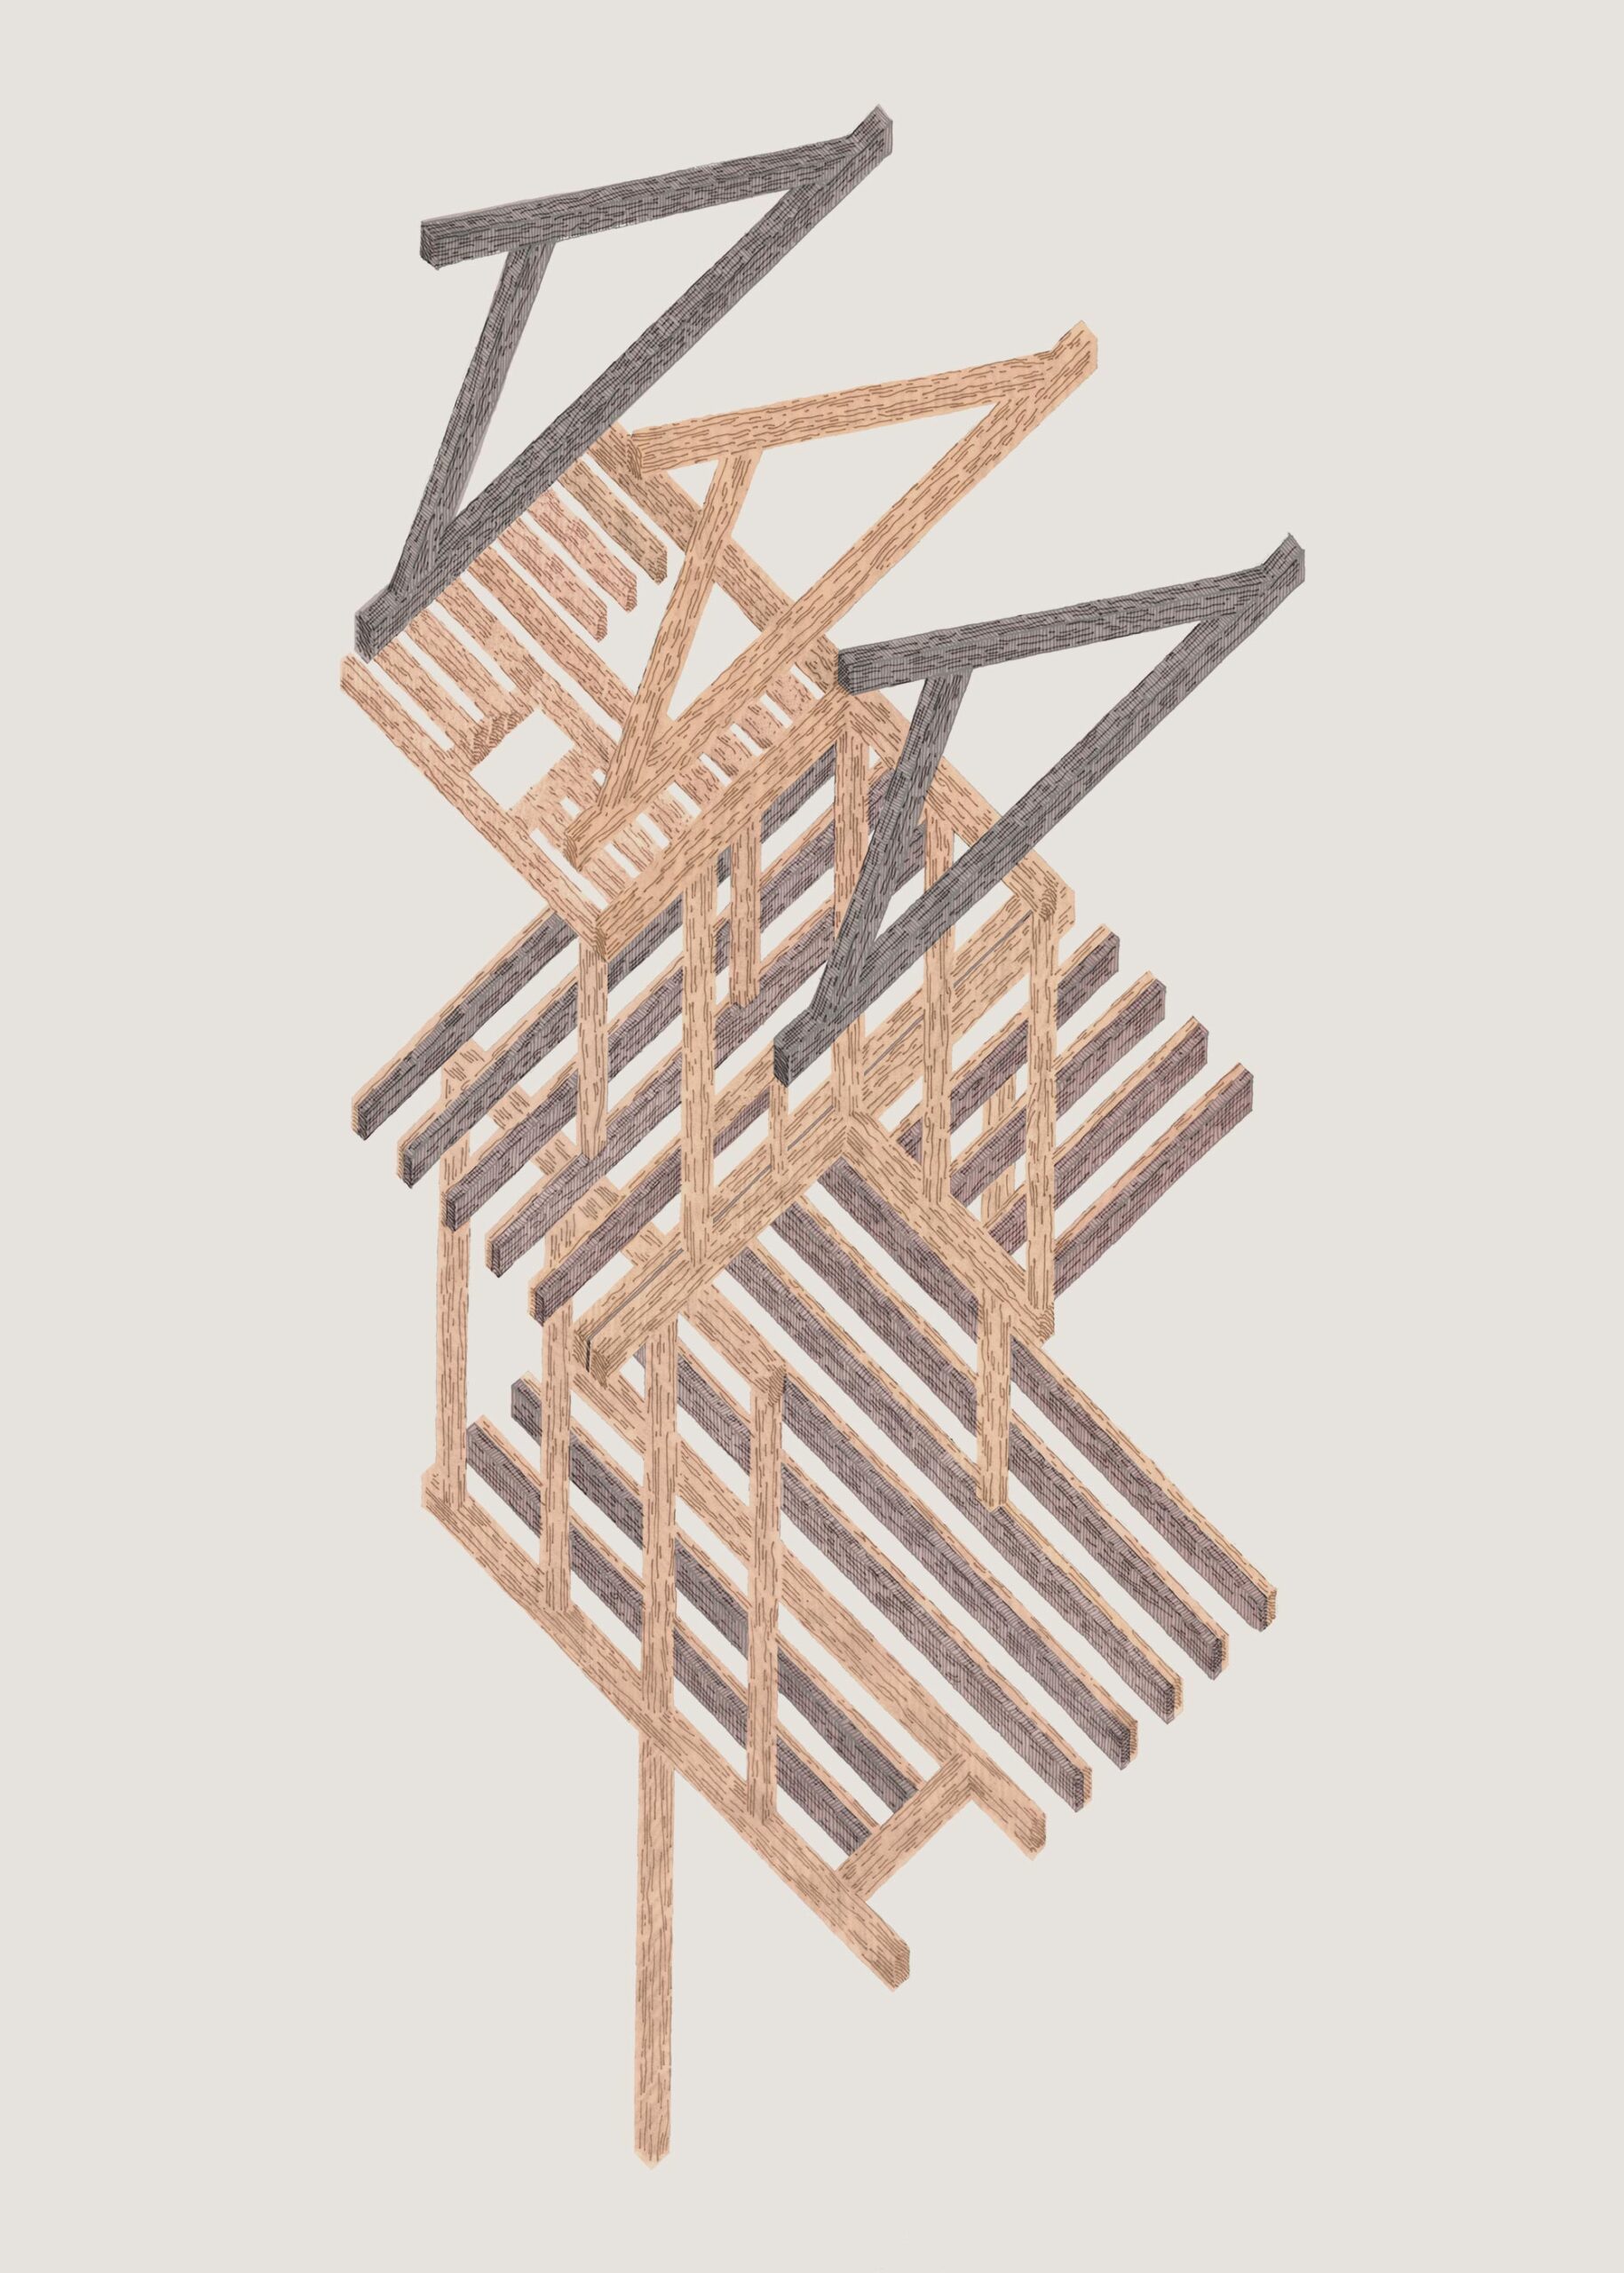 Axonometric of the latticed timber structure; from single post to structural canopy. 